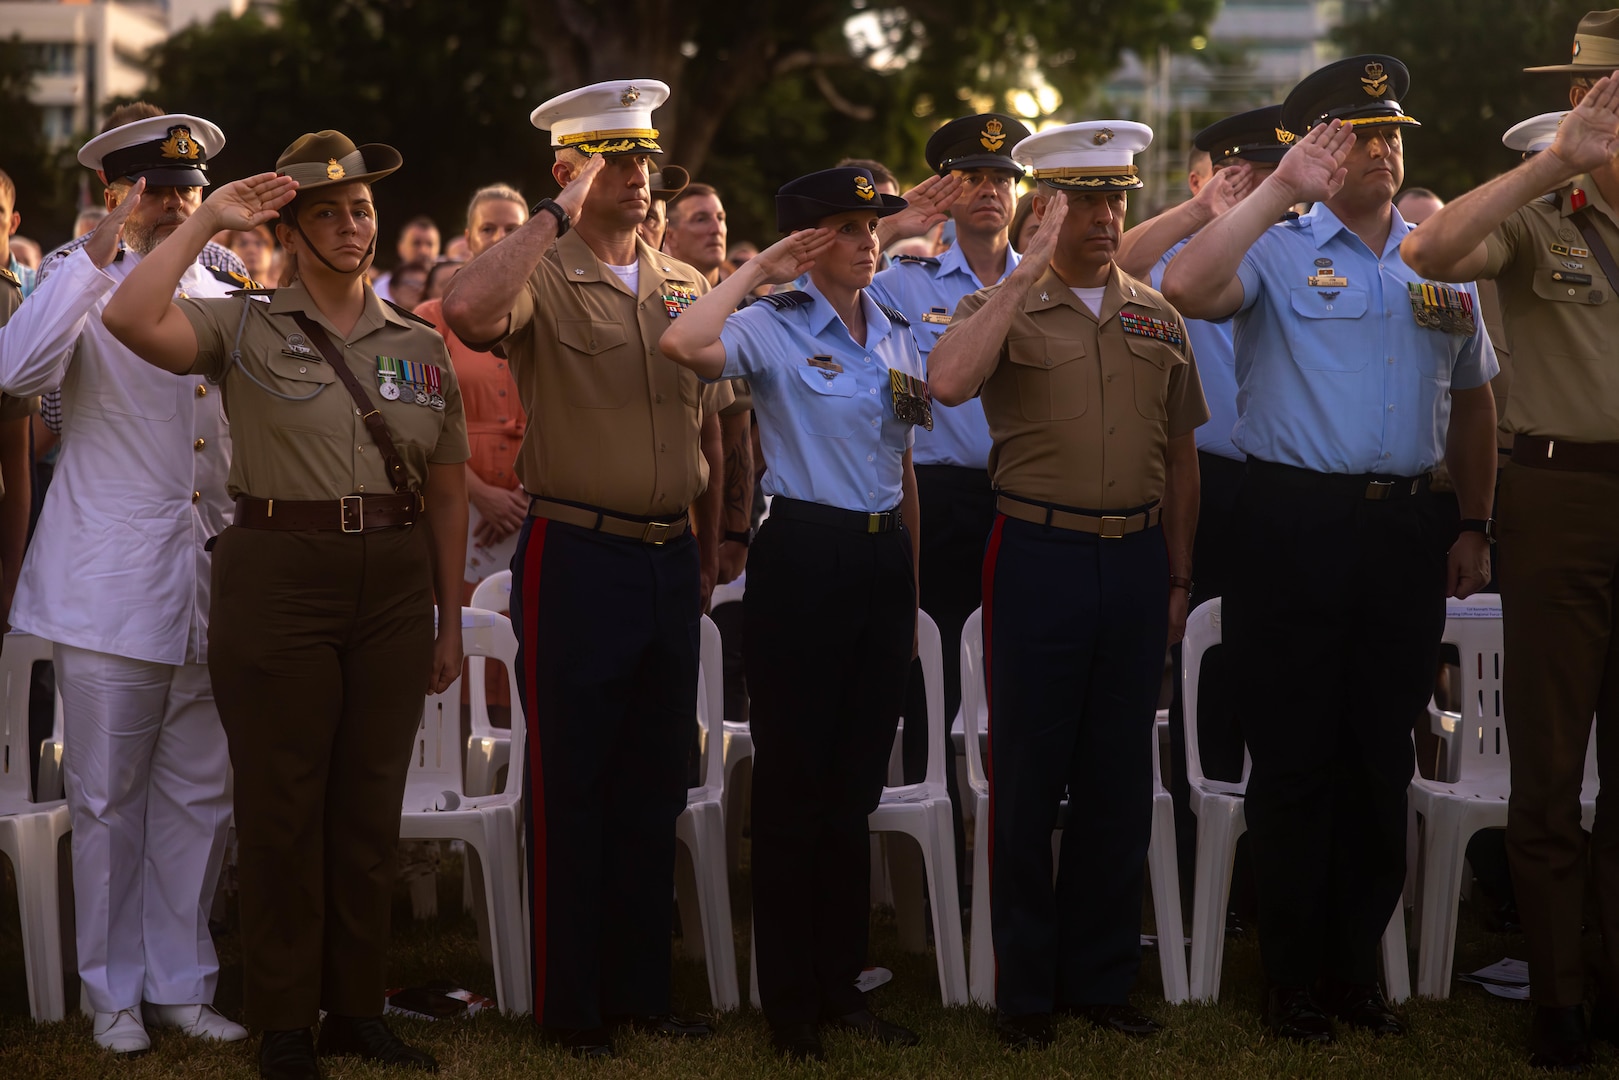 U.S. Marine Corps Col. Brian T. Mulvihill, center right, the commanding officer of Marine Rotational Force – Darwin 24.3, and Lt. Col. Scott Stafford, center left, the executive officer of MRF-D-24.3, salute during the 109th commemorative service in honor of Anzac Day at Darwin Cenotaph War Memorial, NT, Australia, April 25, 2024. Anzac Day marks the landings in Gallipoli of Australian and New Zealand Army Corps soldiers in 1915, and commemorates all Australian personnel who served and died in wars, conflicts, and peacekeeping operations. MRF-D 24.3 Marines and Sailors showed their support to the Australian Defence Force personnel commemorating Anzac Day through dawn services and other commemorative services. Mulvihill is a native of New York. Stafford is a native of Indiana. (U.S. Marine Corps photo by Cpl. Juan Torres)